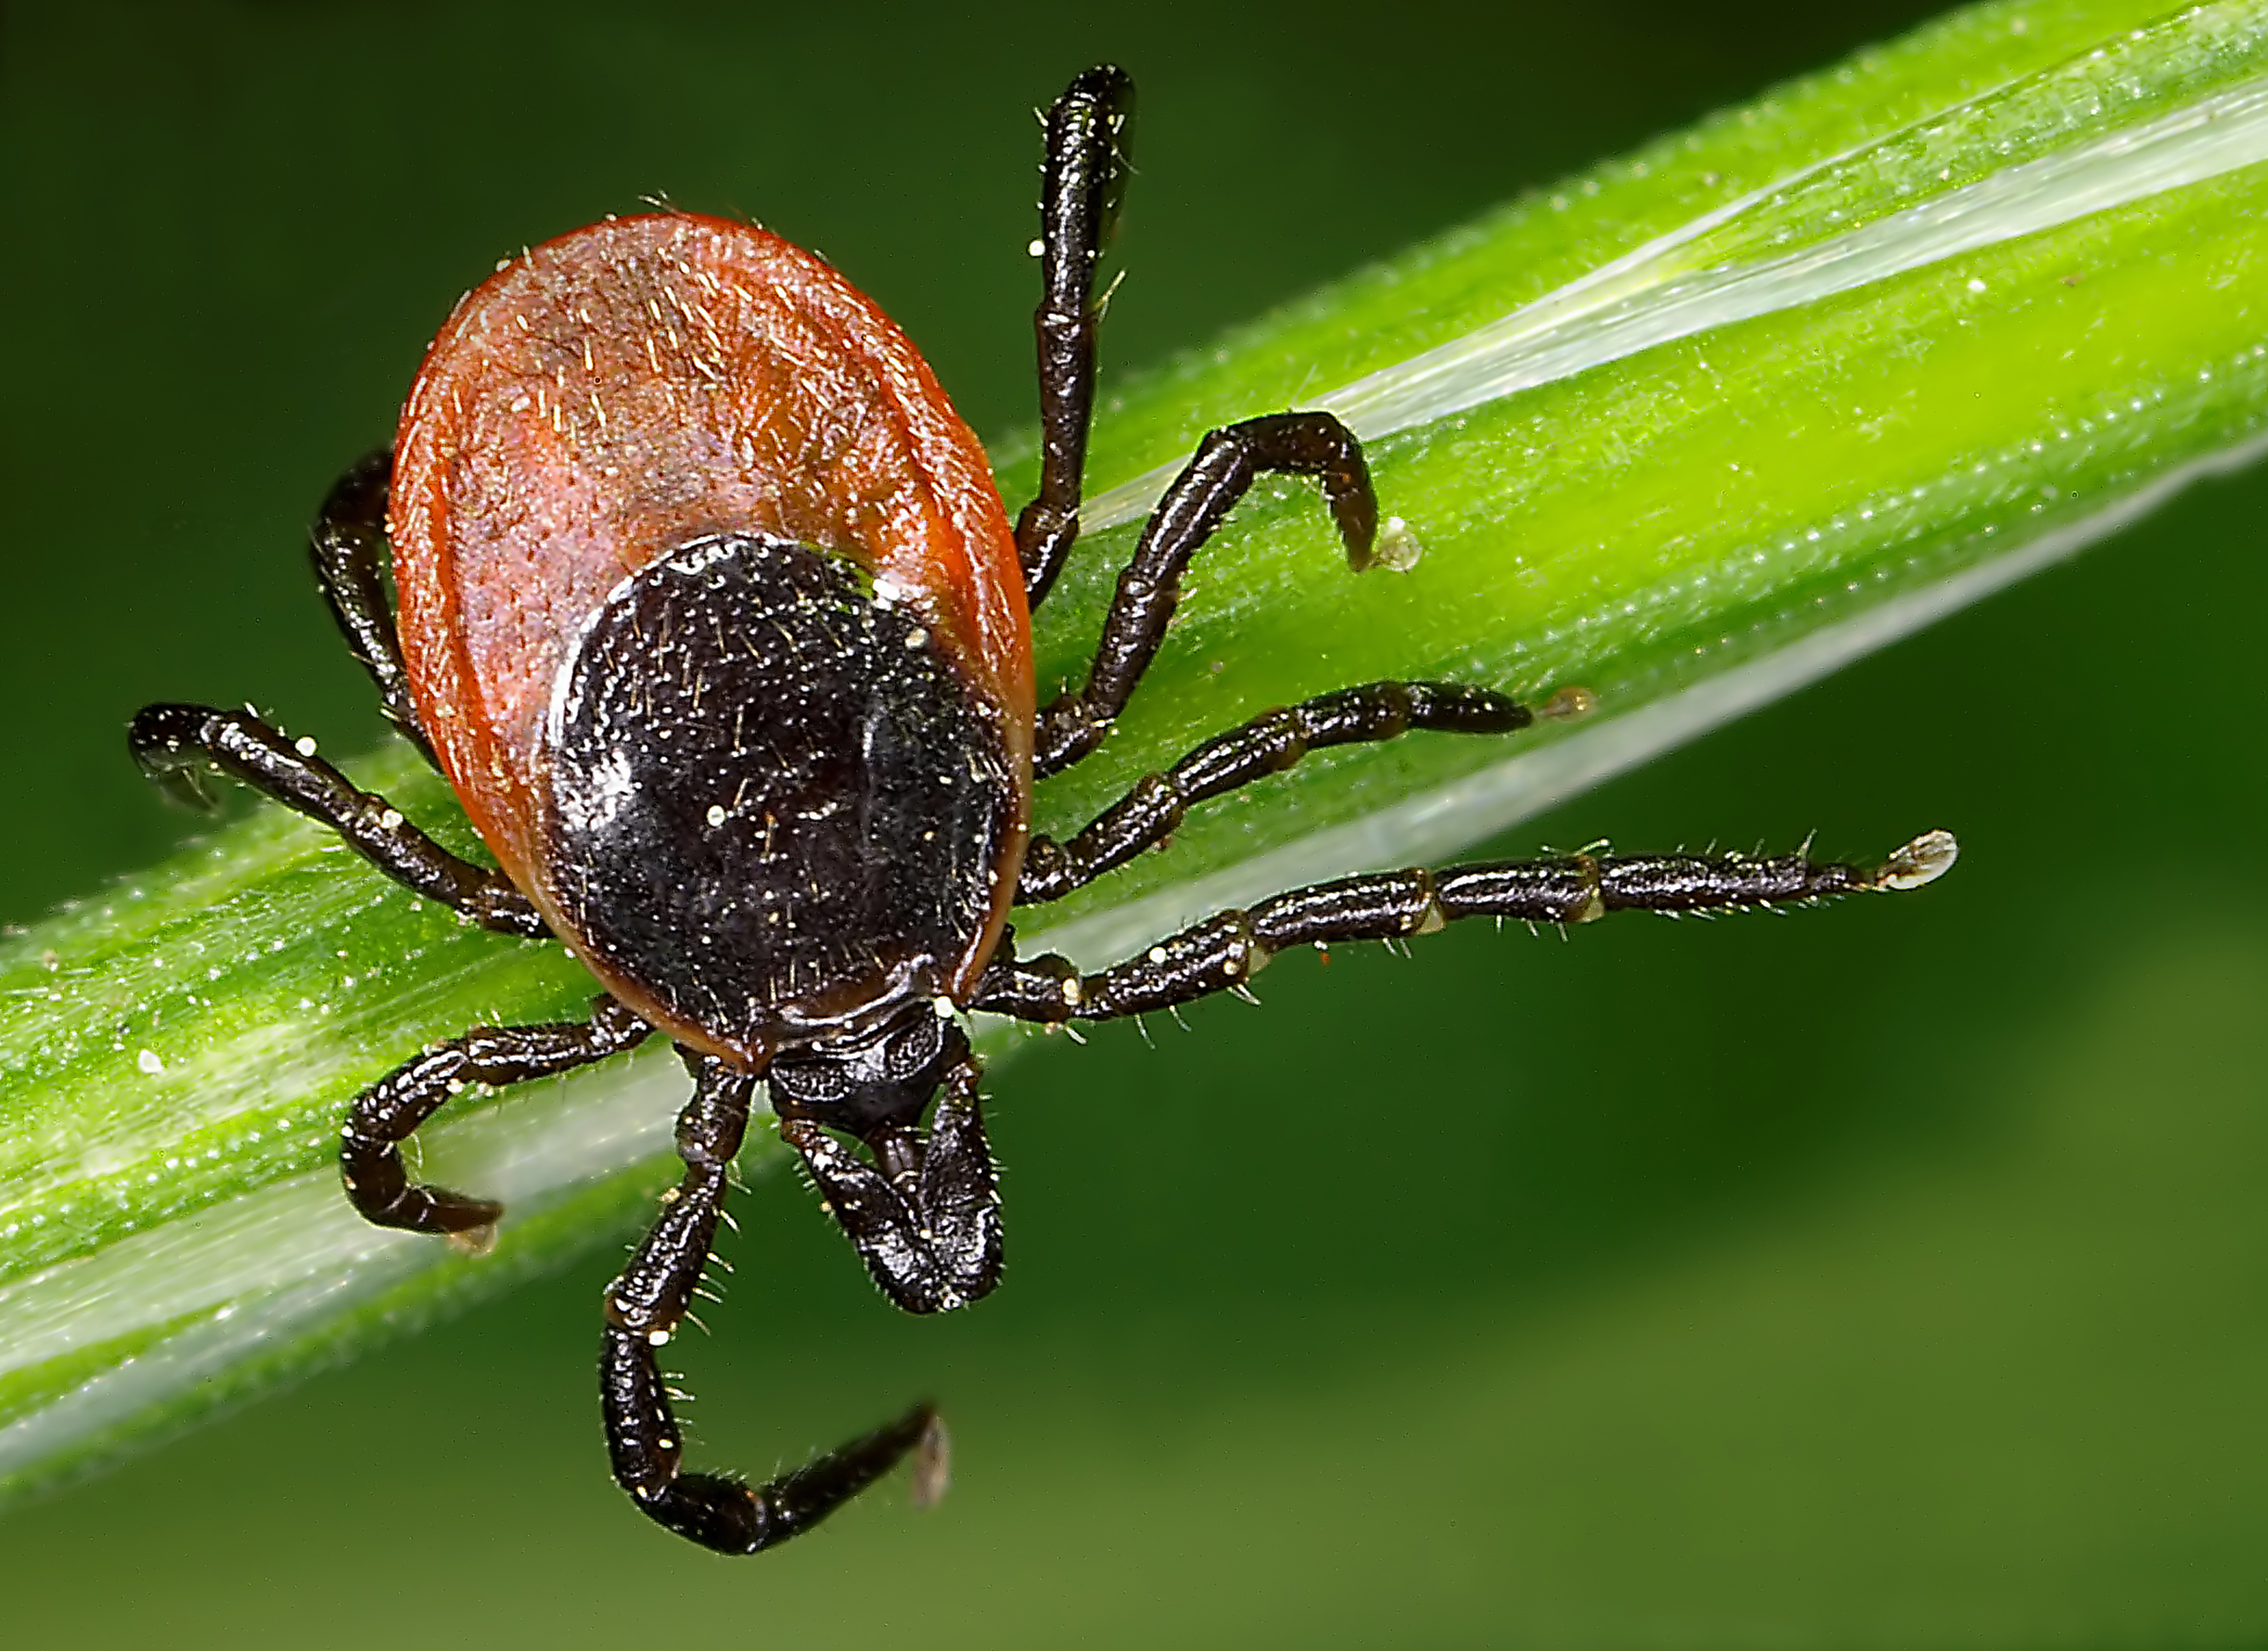 Lyme disease cases are rising. We don’t have a vaccine — but we used to